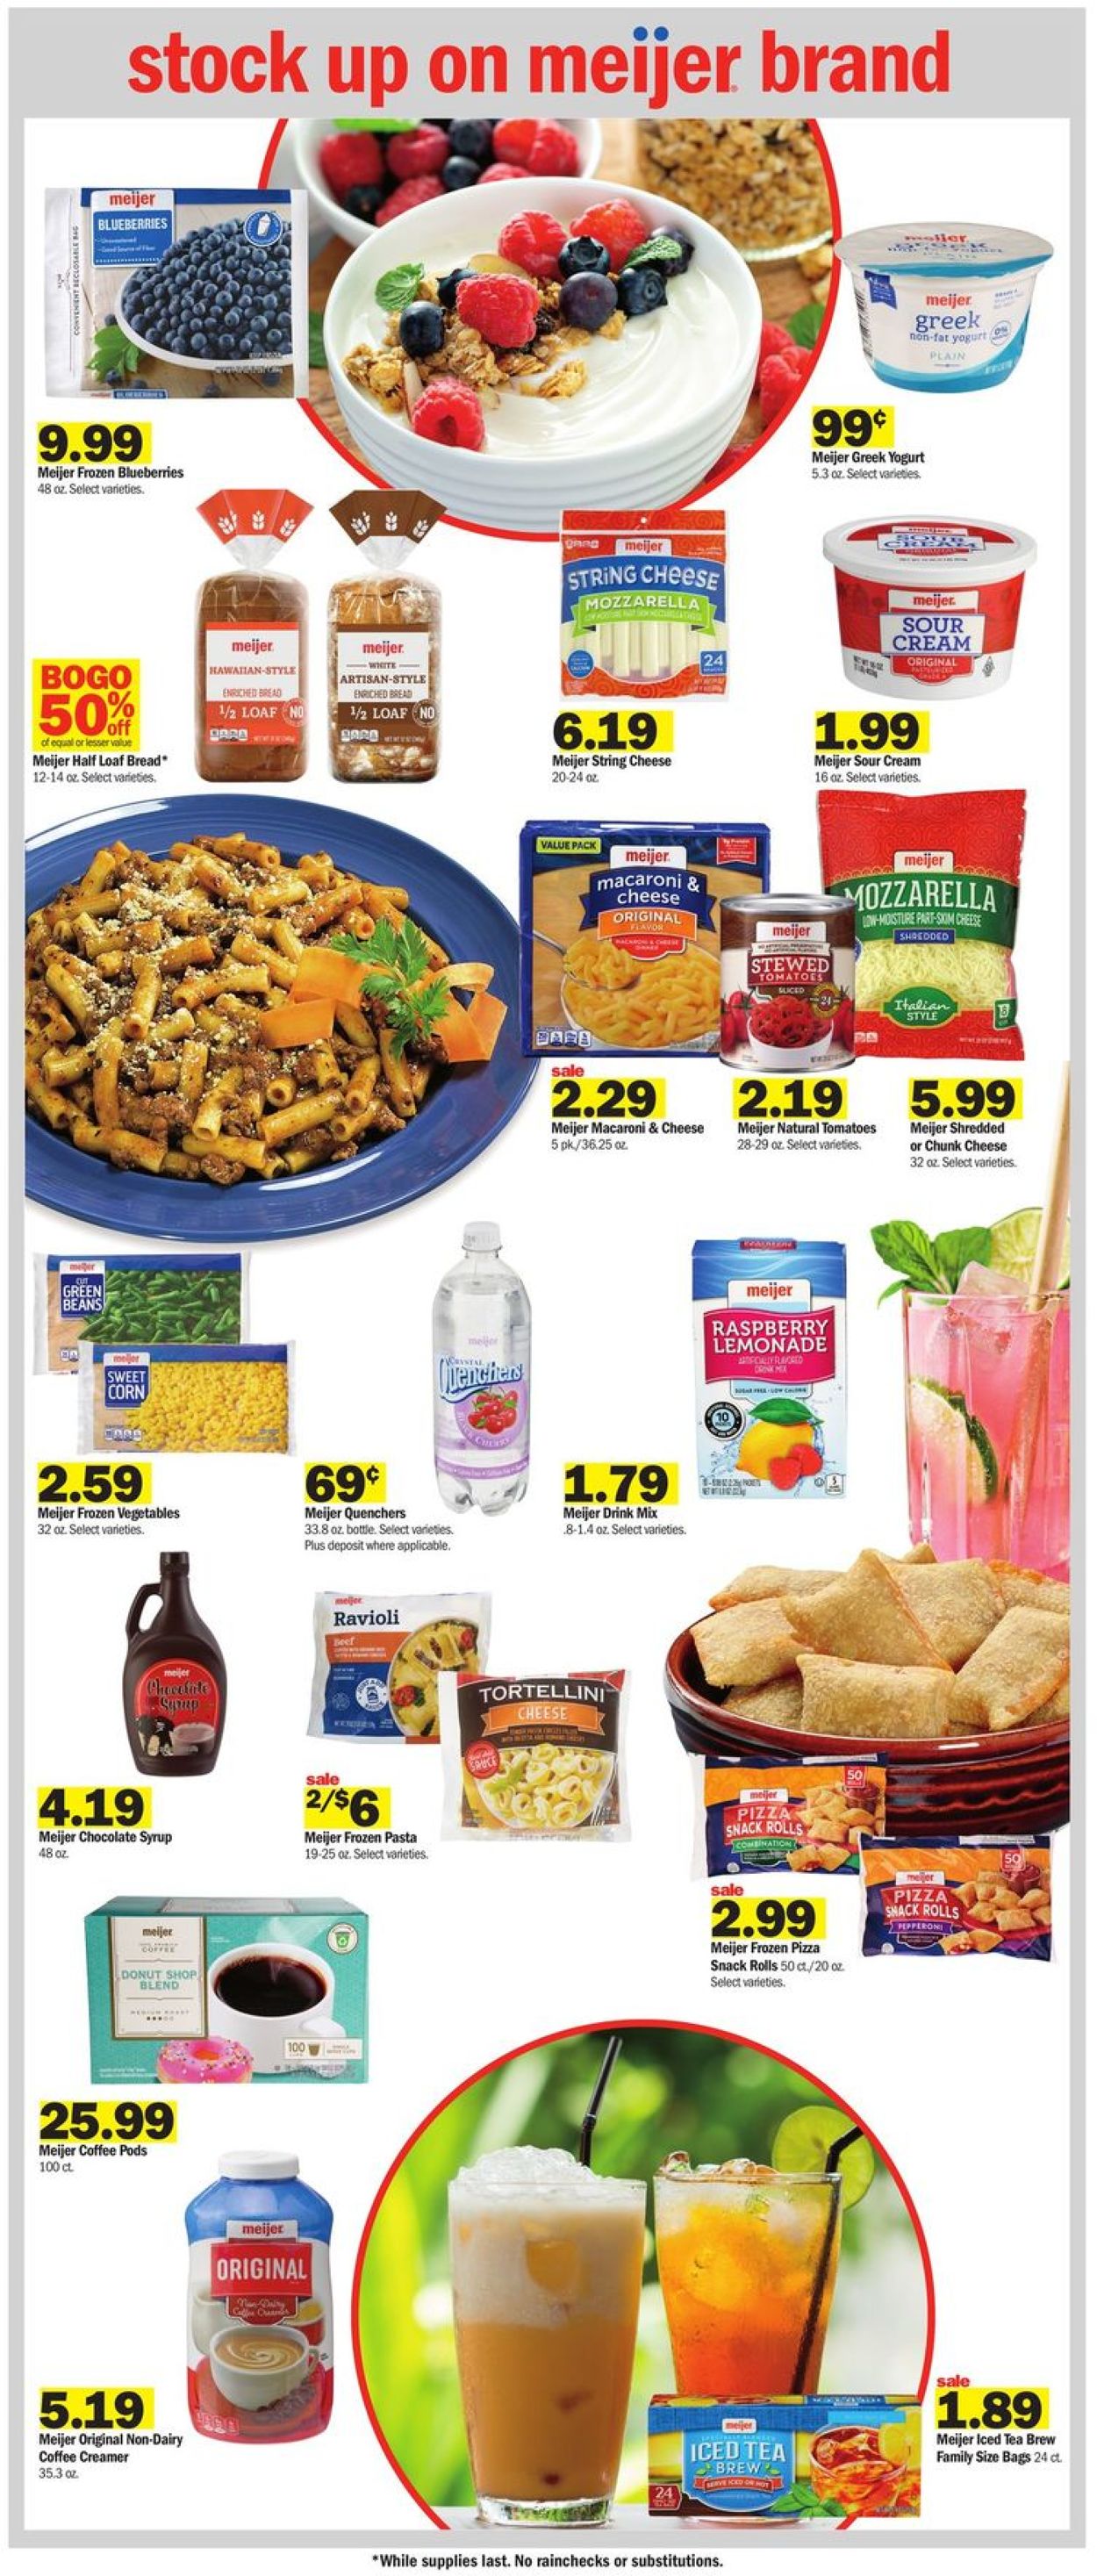 Meijer Current weekly ad 07/31 - 08/06/2022 [9] - frequent-ads.com